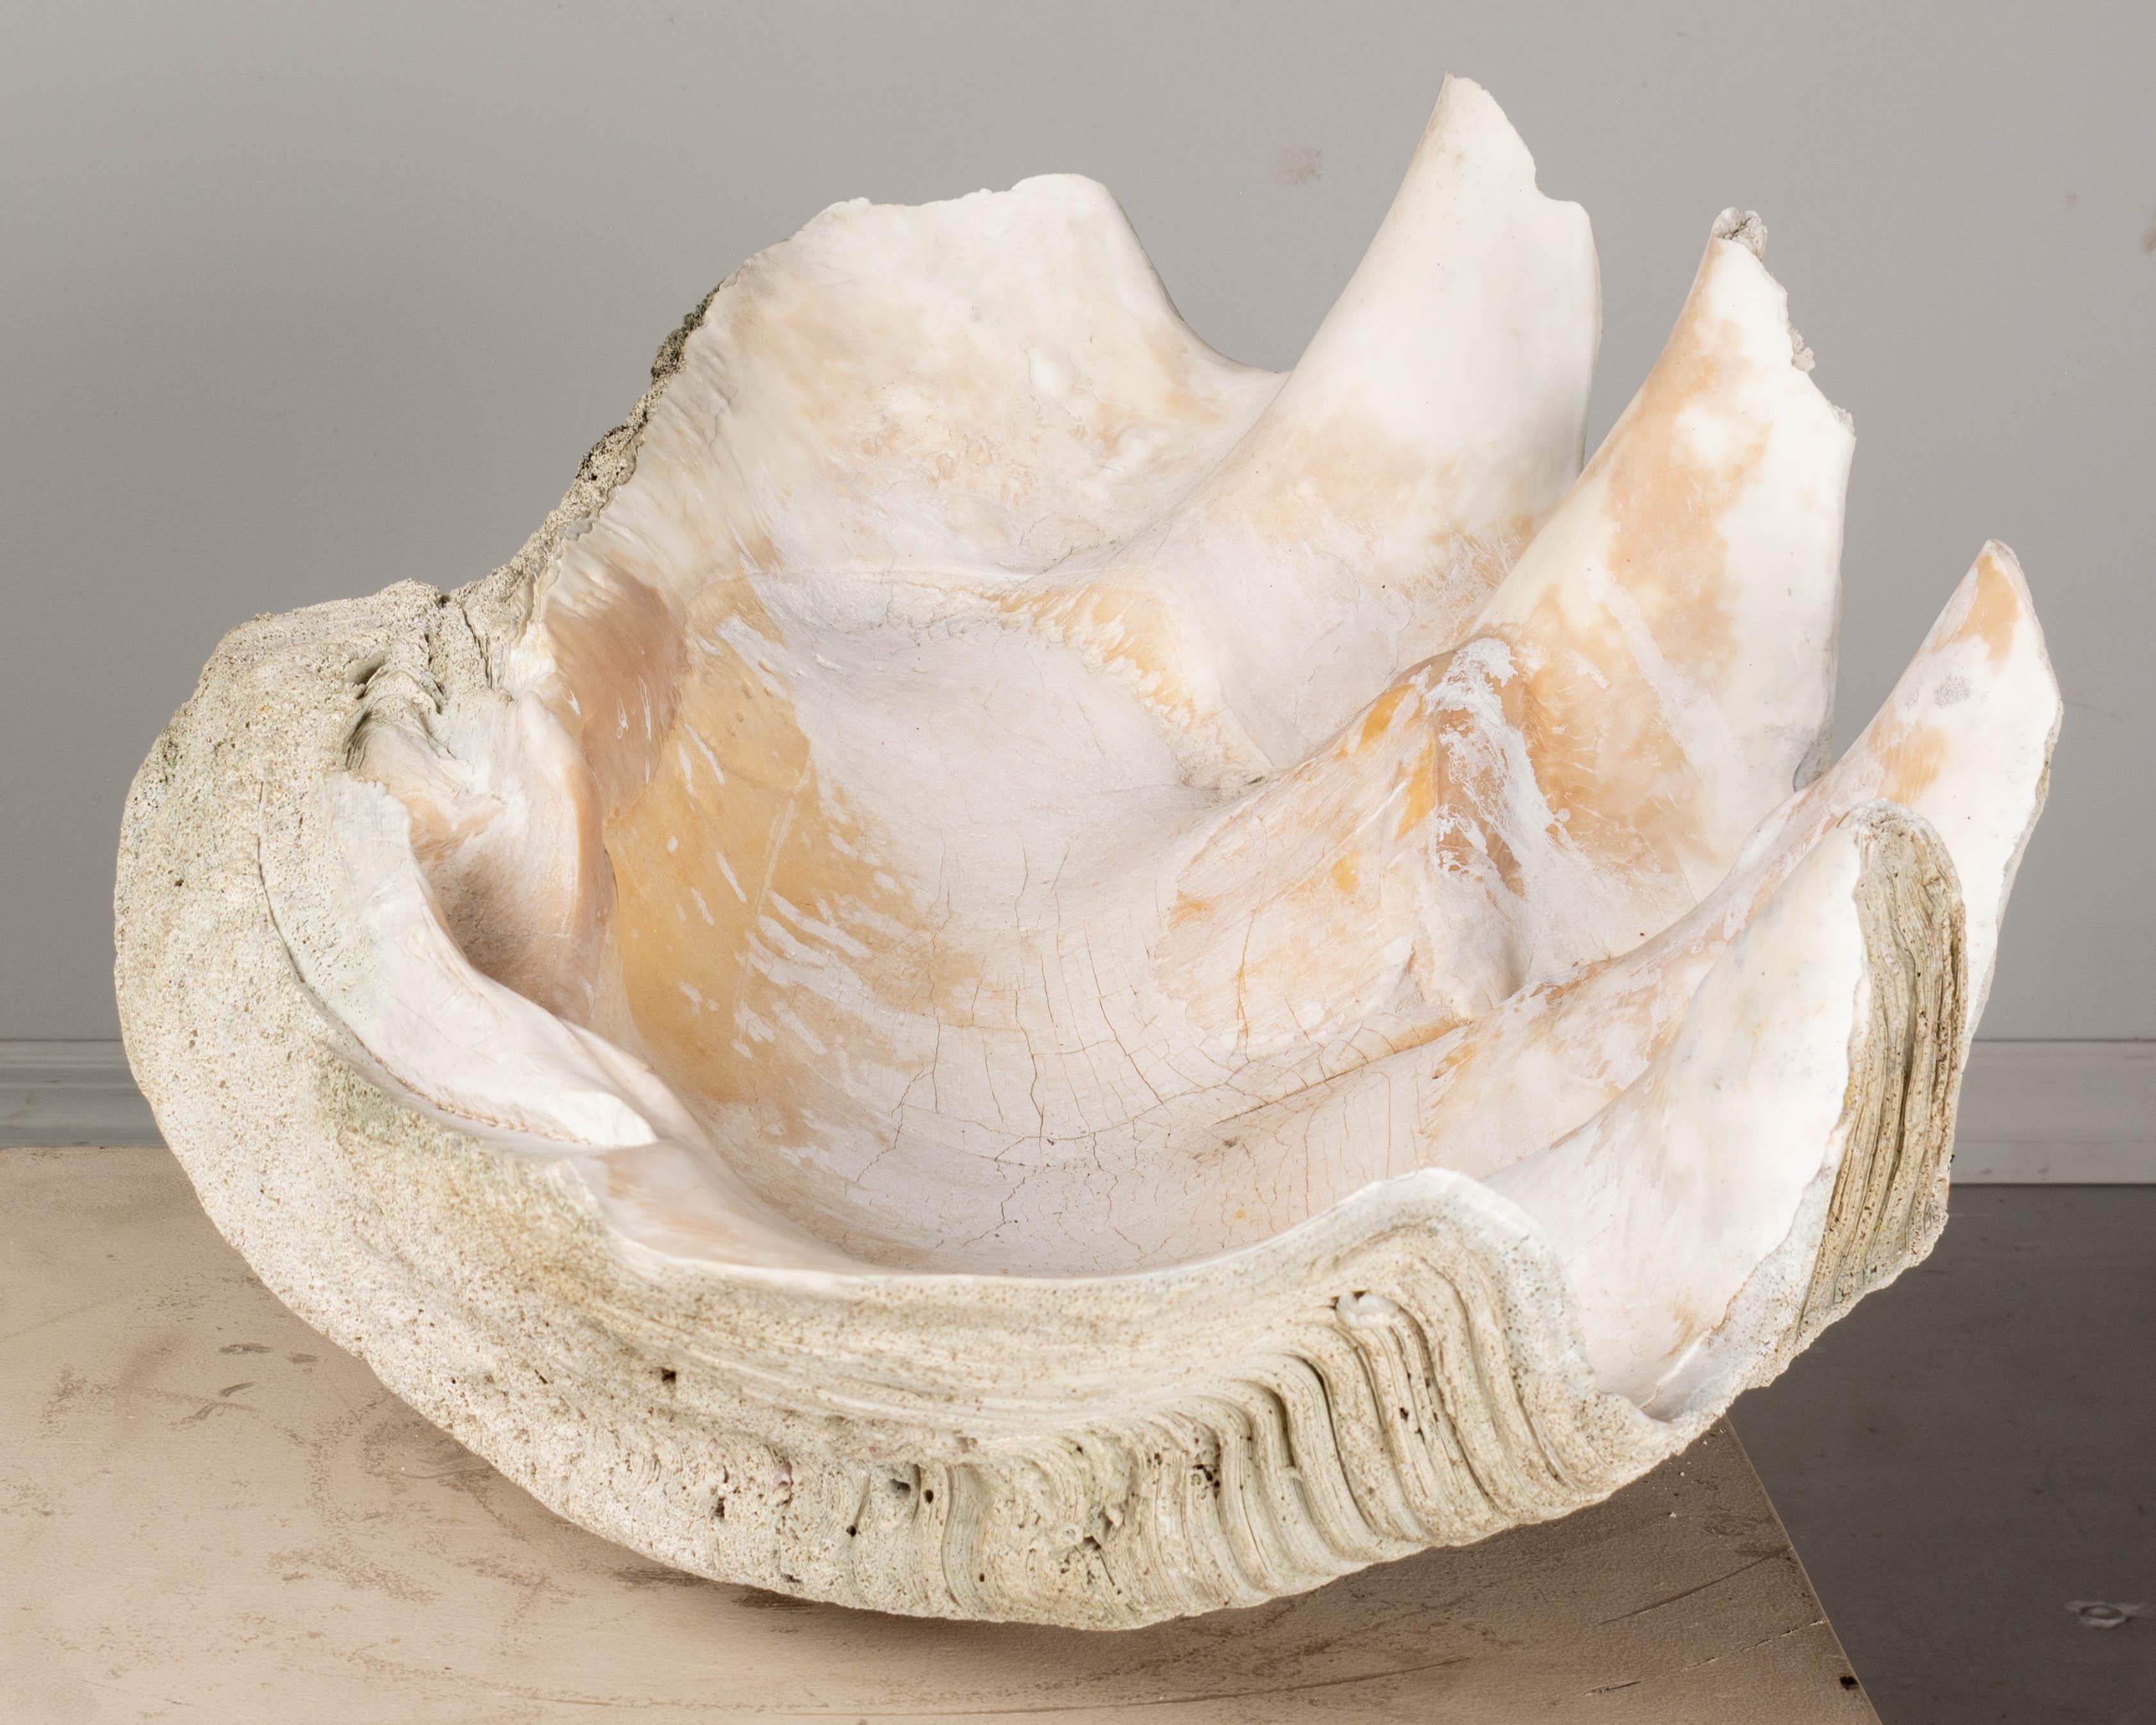 A rare natural specimen giant clam sea shell with lustrous pinkish interior and nicely shaped form. An exceptional decorative element from the natural world. Weight: 150 lbs. Contact us for a competitive shipping quotation. Please refer to photos